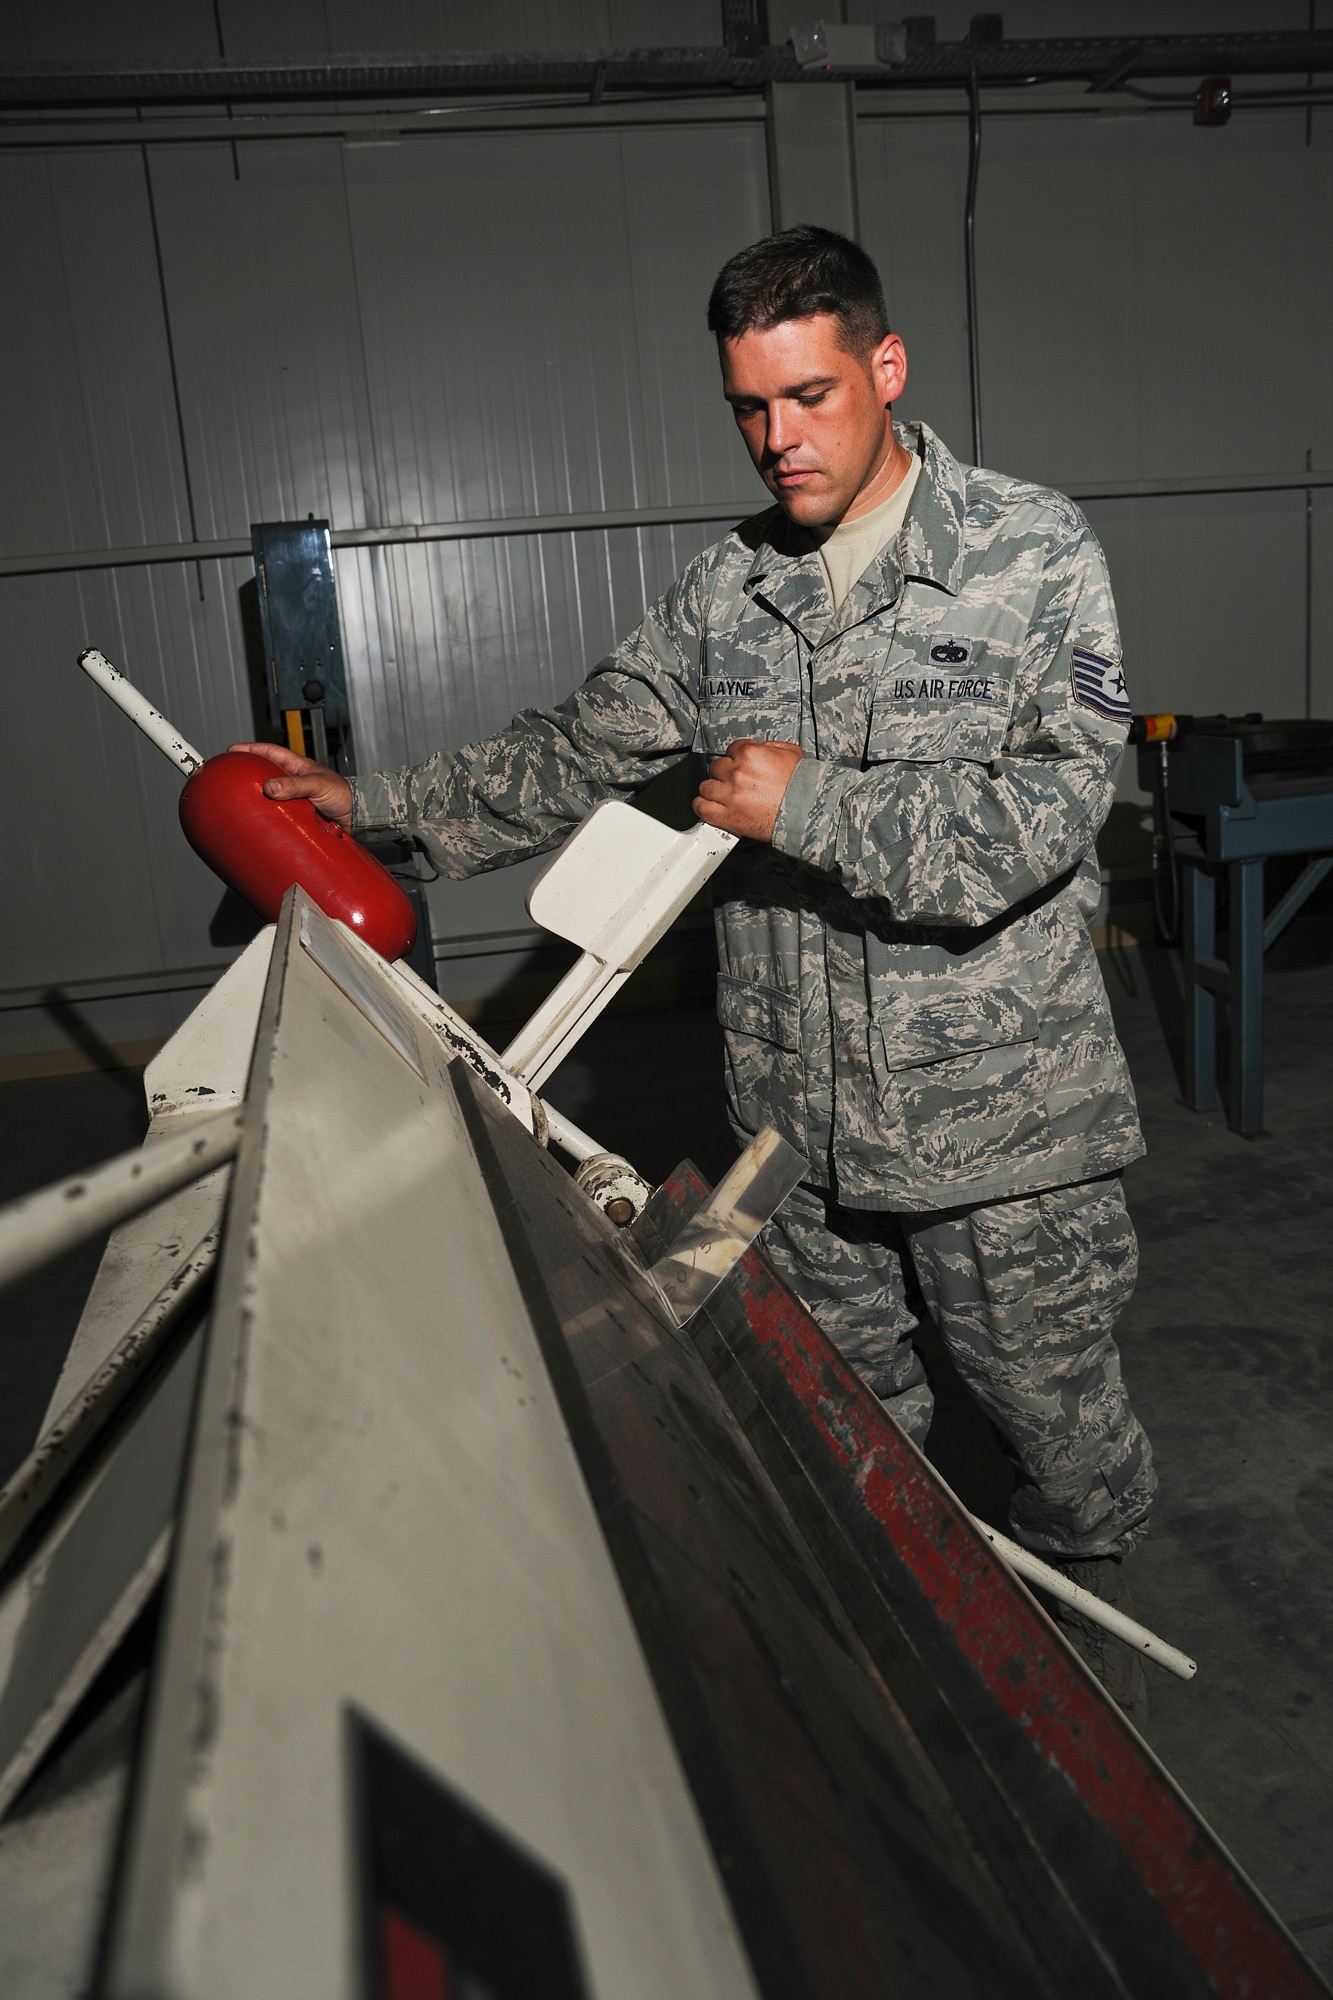 TRANSIT CENTER AT MANAS, Kyrgyzstan - Meet the Warrior of the Week. Tech. Sgt. Harold Layne is a  376th Expeditionary Aircraft Maintenance Squadron aircraft structural maintenance craftsman, deployed from the 92nd Maintenance Squadron, Fairchild Air Force Base, Wash.  He hails from Cincinnati, Ohio.  (U.S. Air Force photo/Staff Sgt. Nathan Bevier)